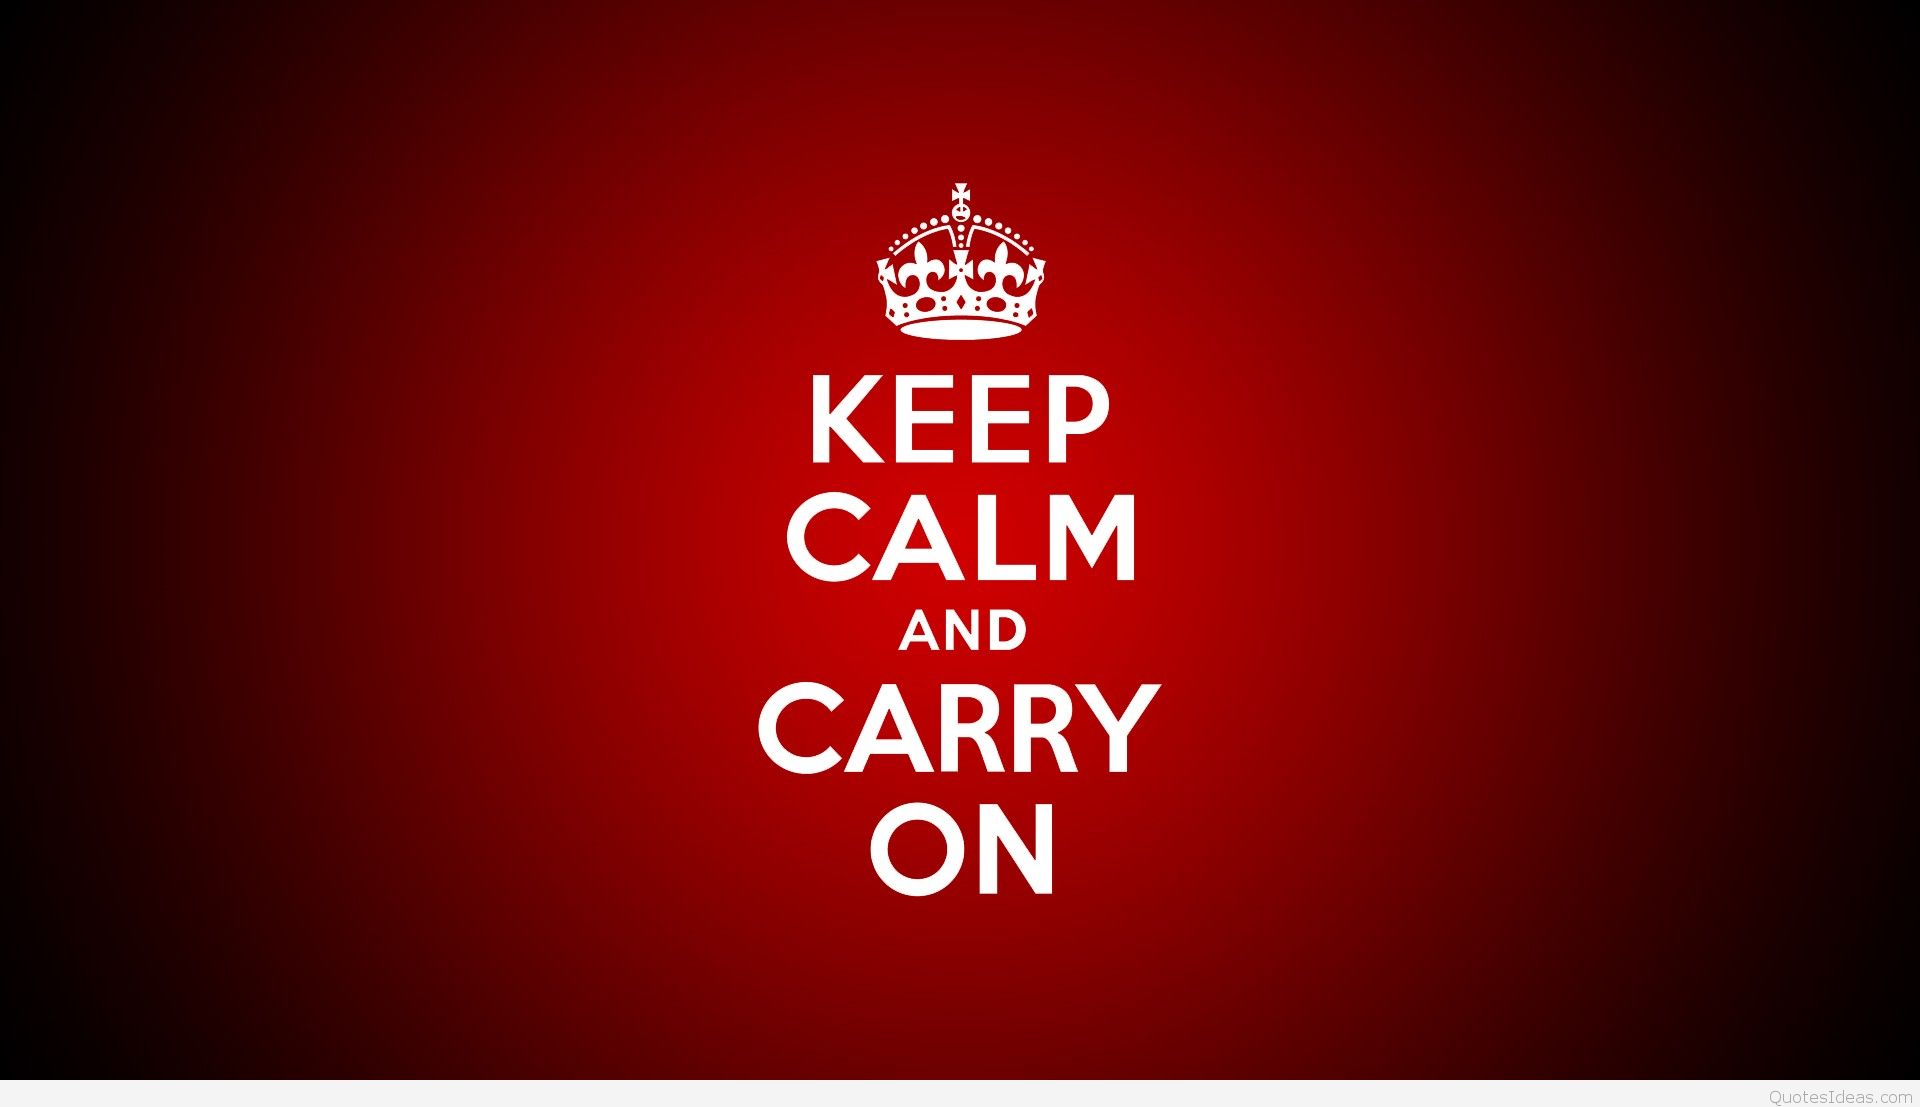 keep calm and carry on wallpaper,text,font,logo,red,brand